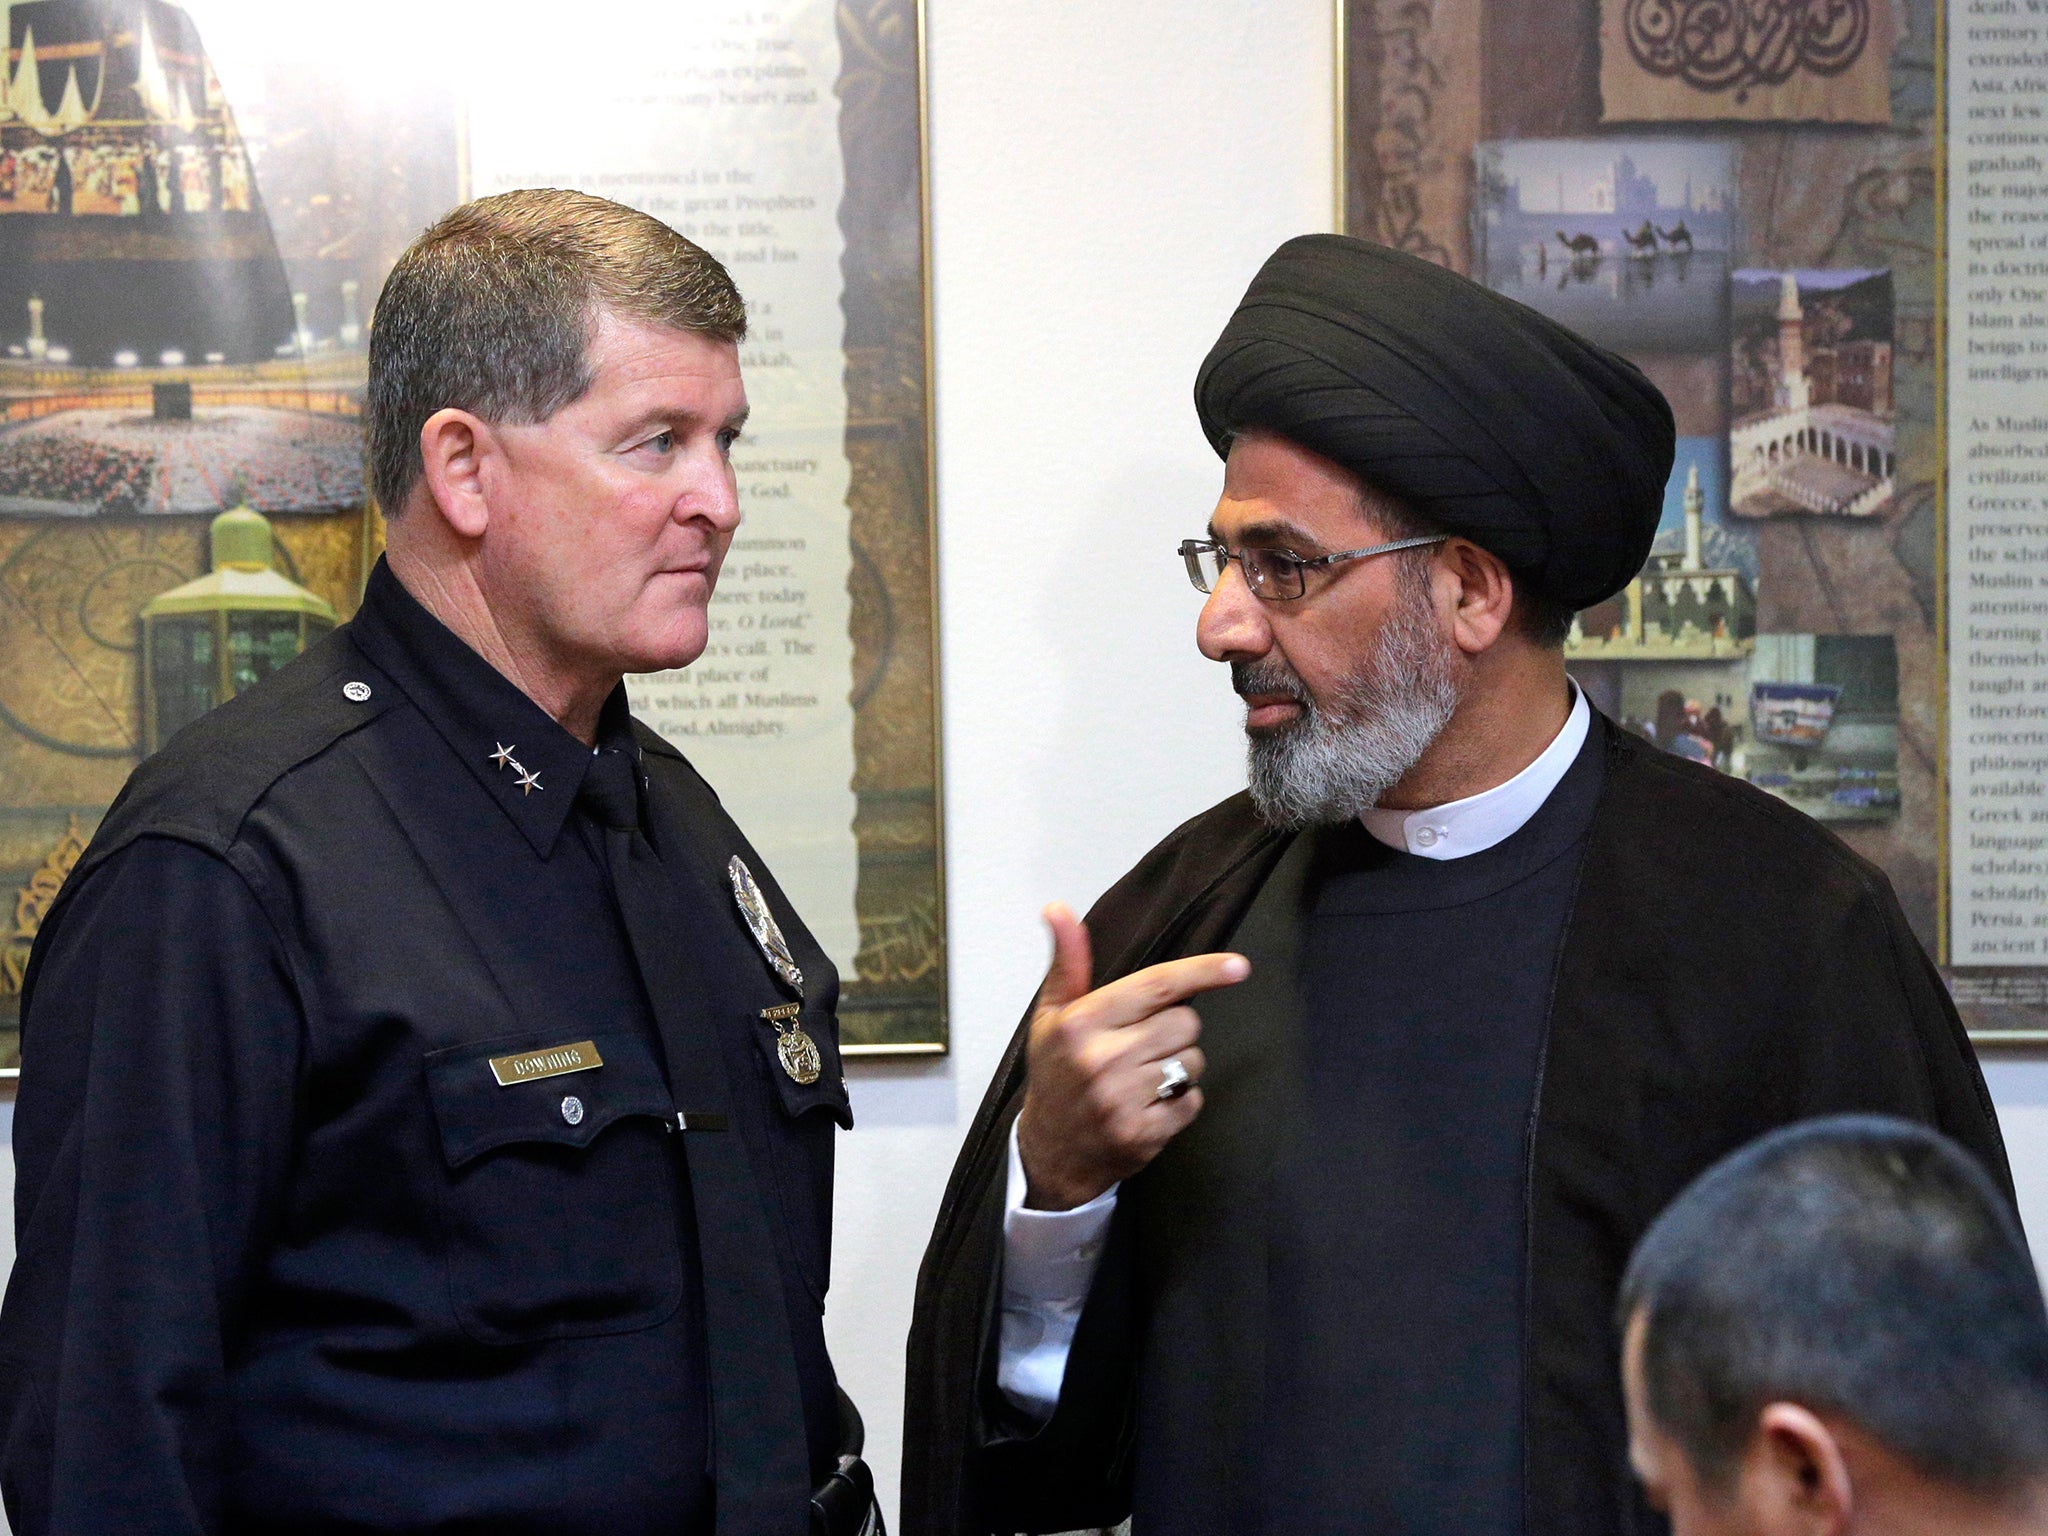 Los Angeles Police Deputy Chief Michael Downing meets with Iman Sayed Moustafa al-Qazwini at the Islamic Educational Center of Orange County to discuss the spate of threatening letters